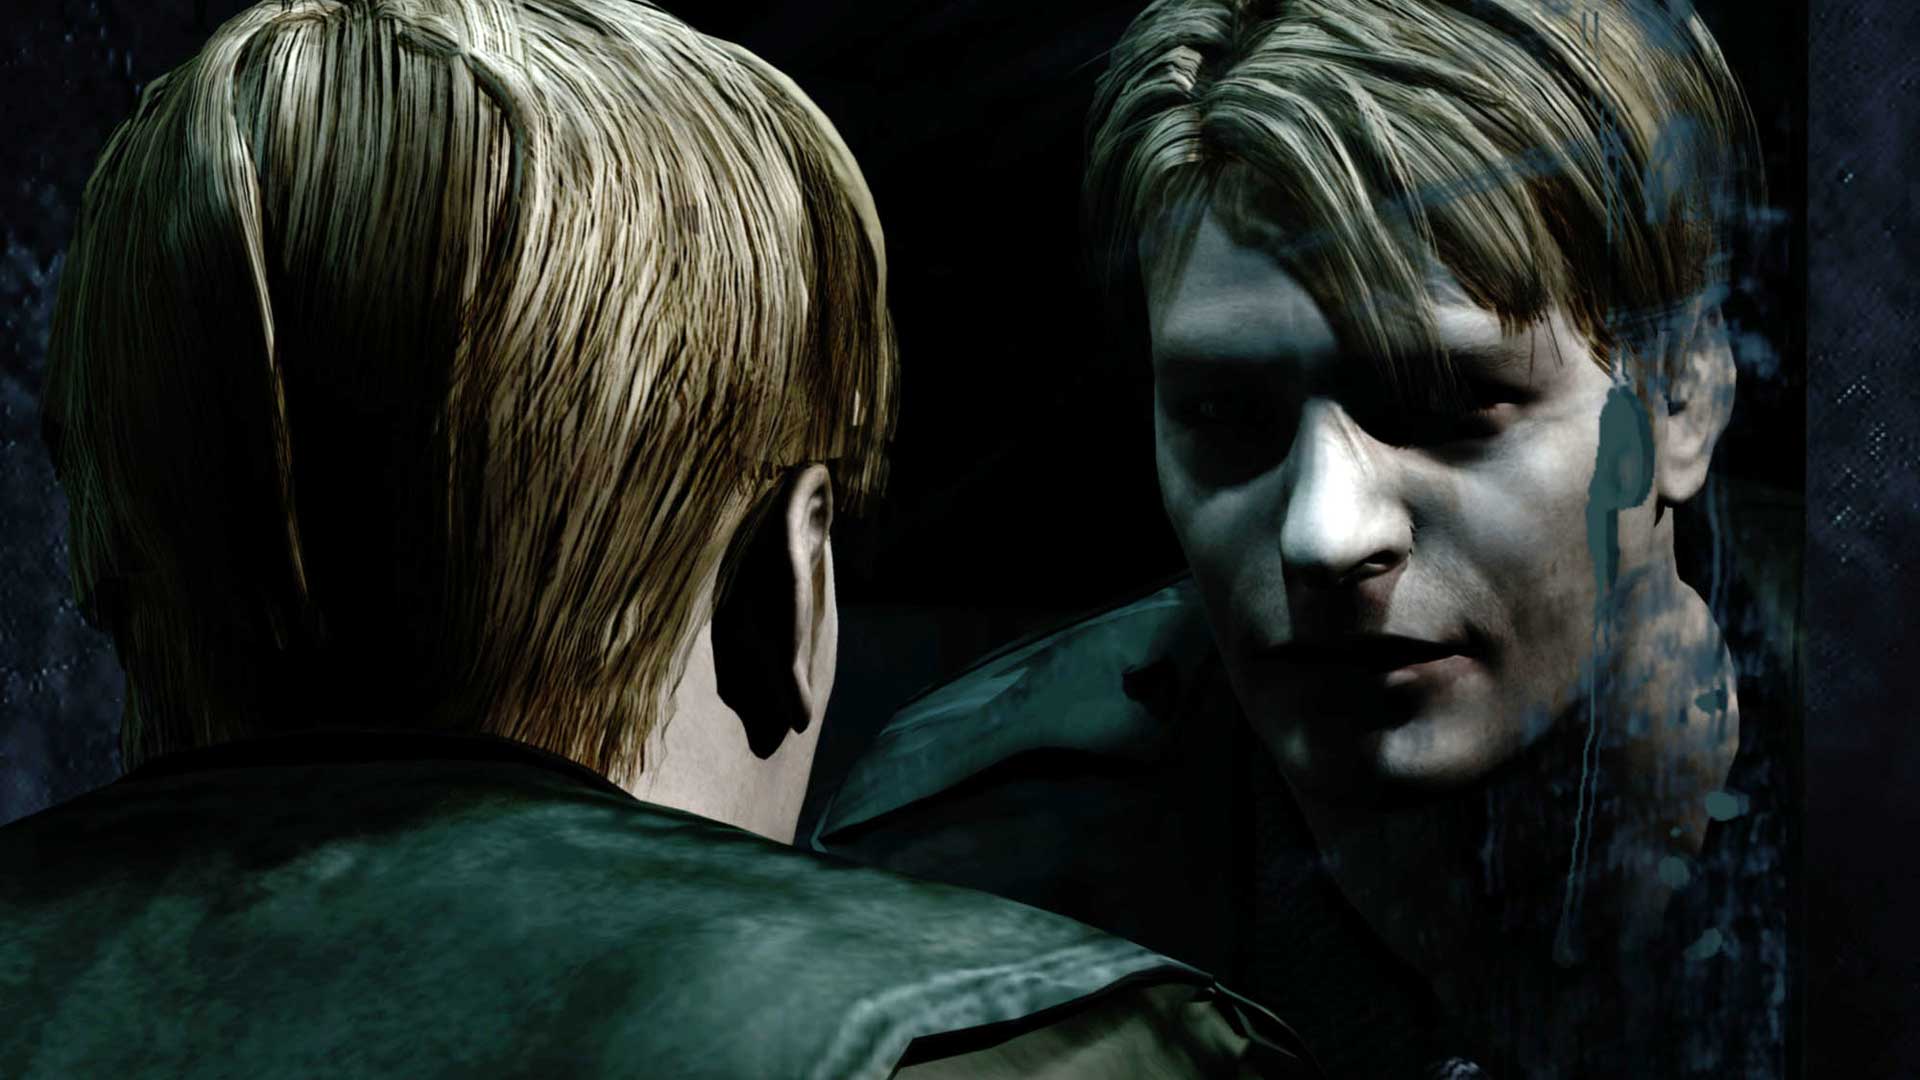 James is looking at himself in the mirror of Konami's Silent Hill 2 game.